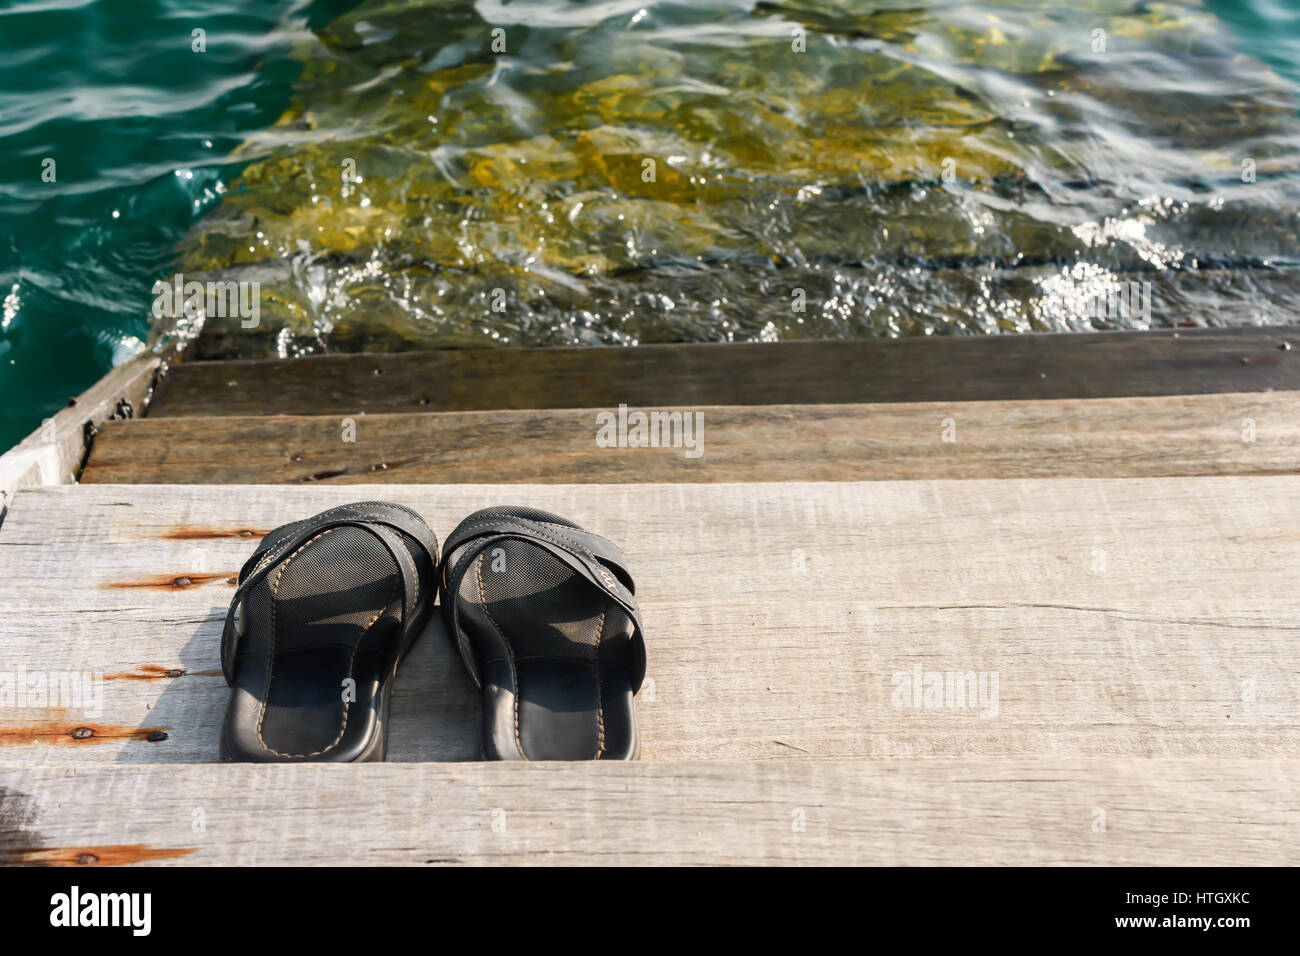 Sandals For Men High Resolution Stock Photography and Images - Alamy